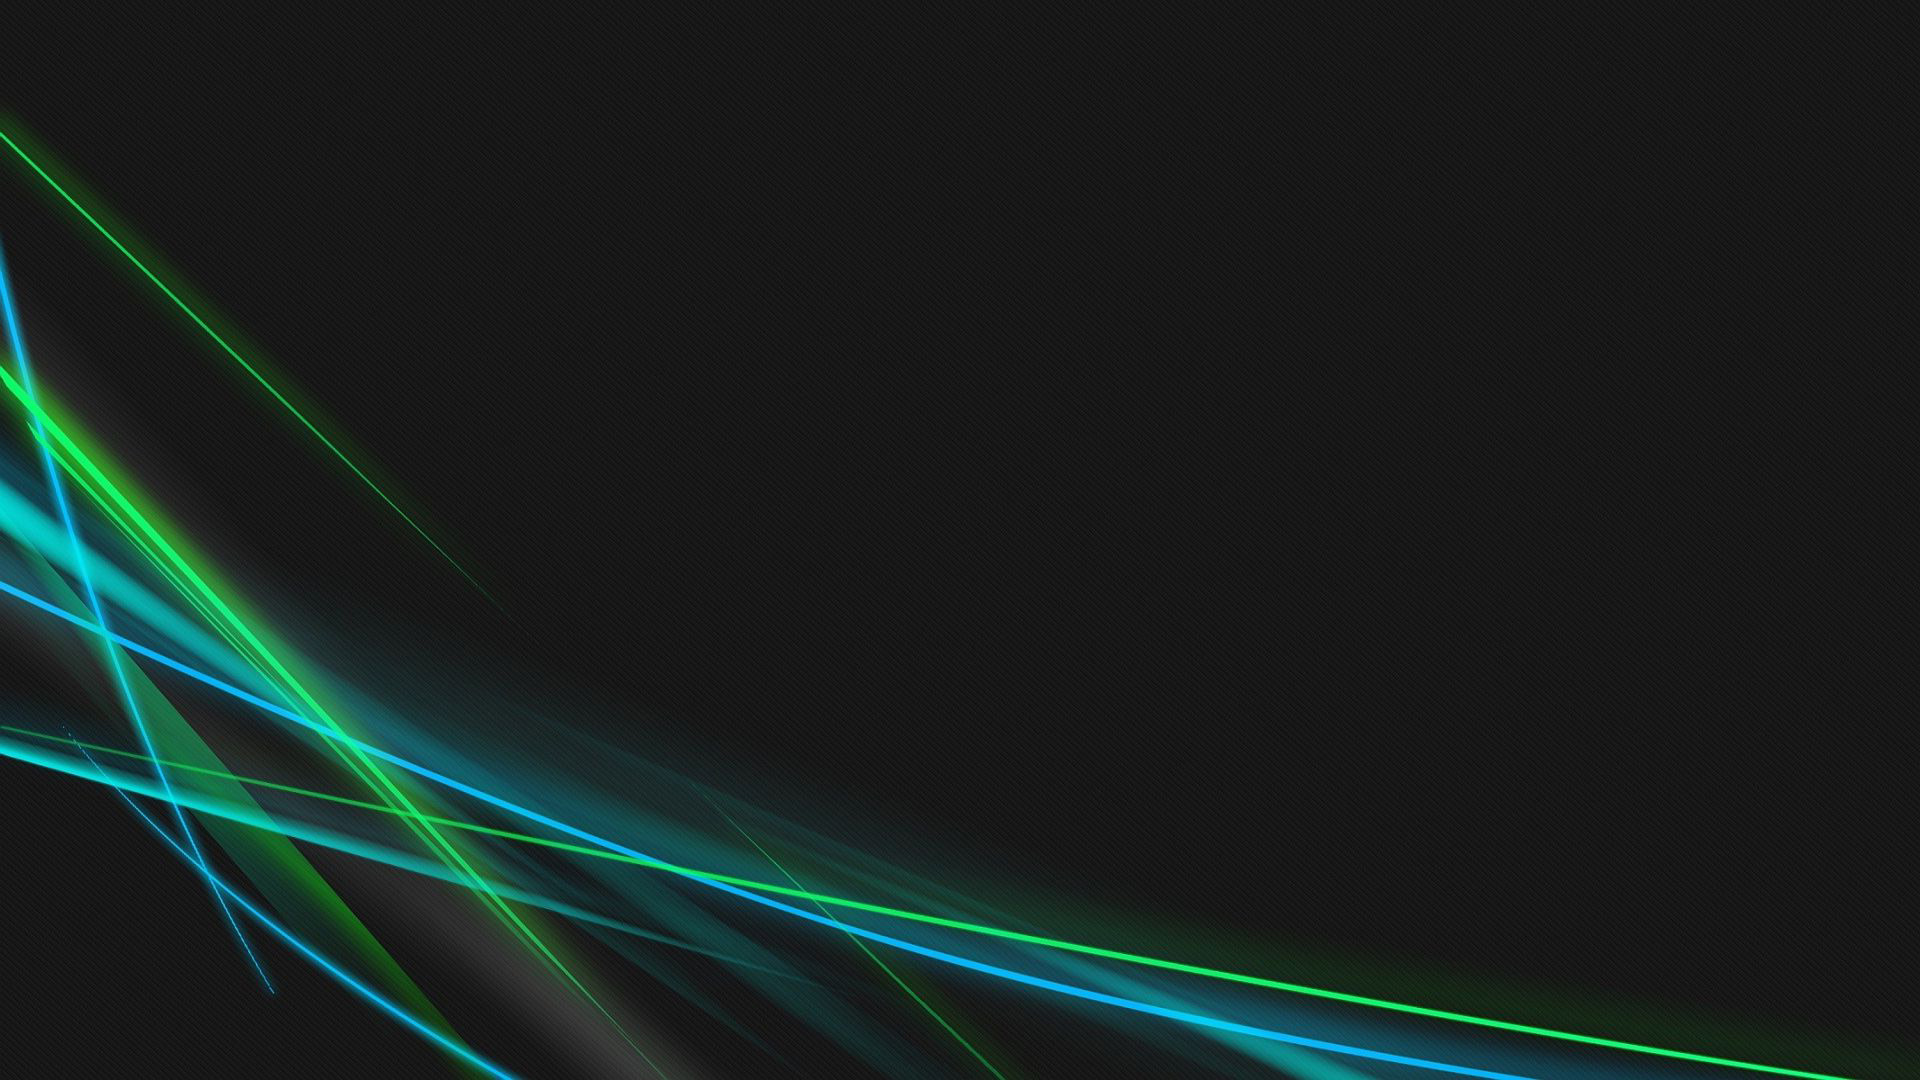 Blue and green neon curves wallpaper 6551 1920x1080